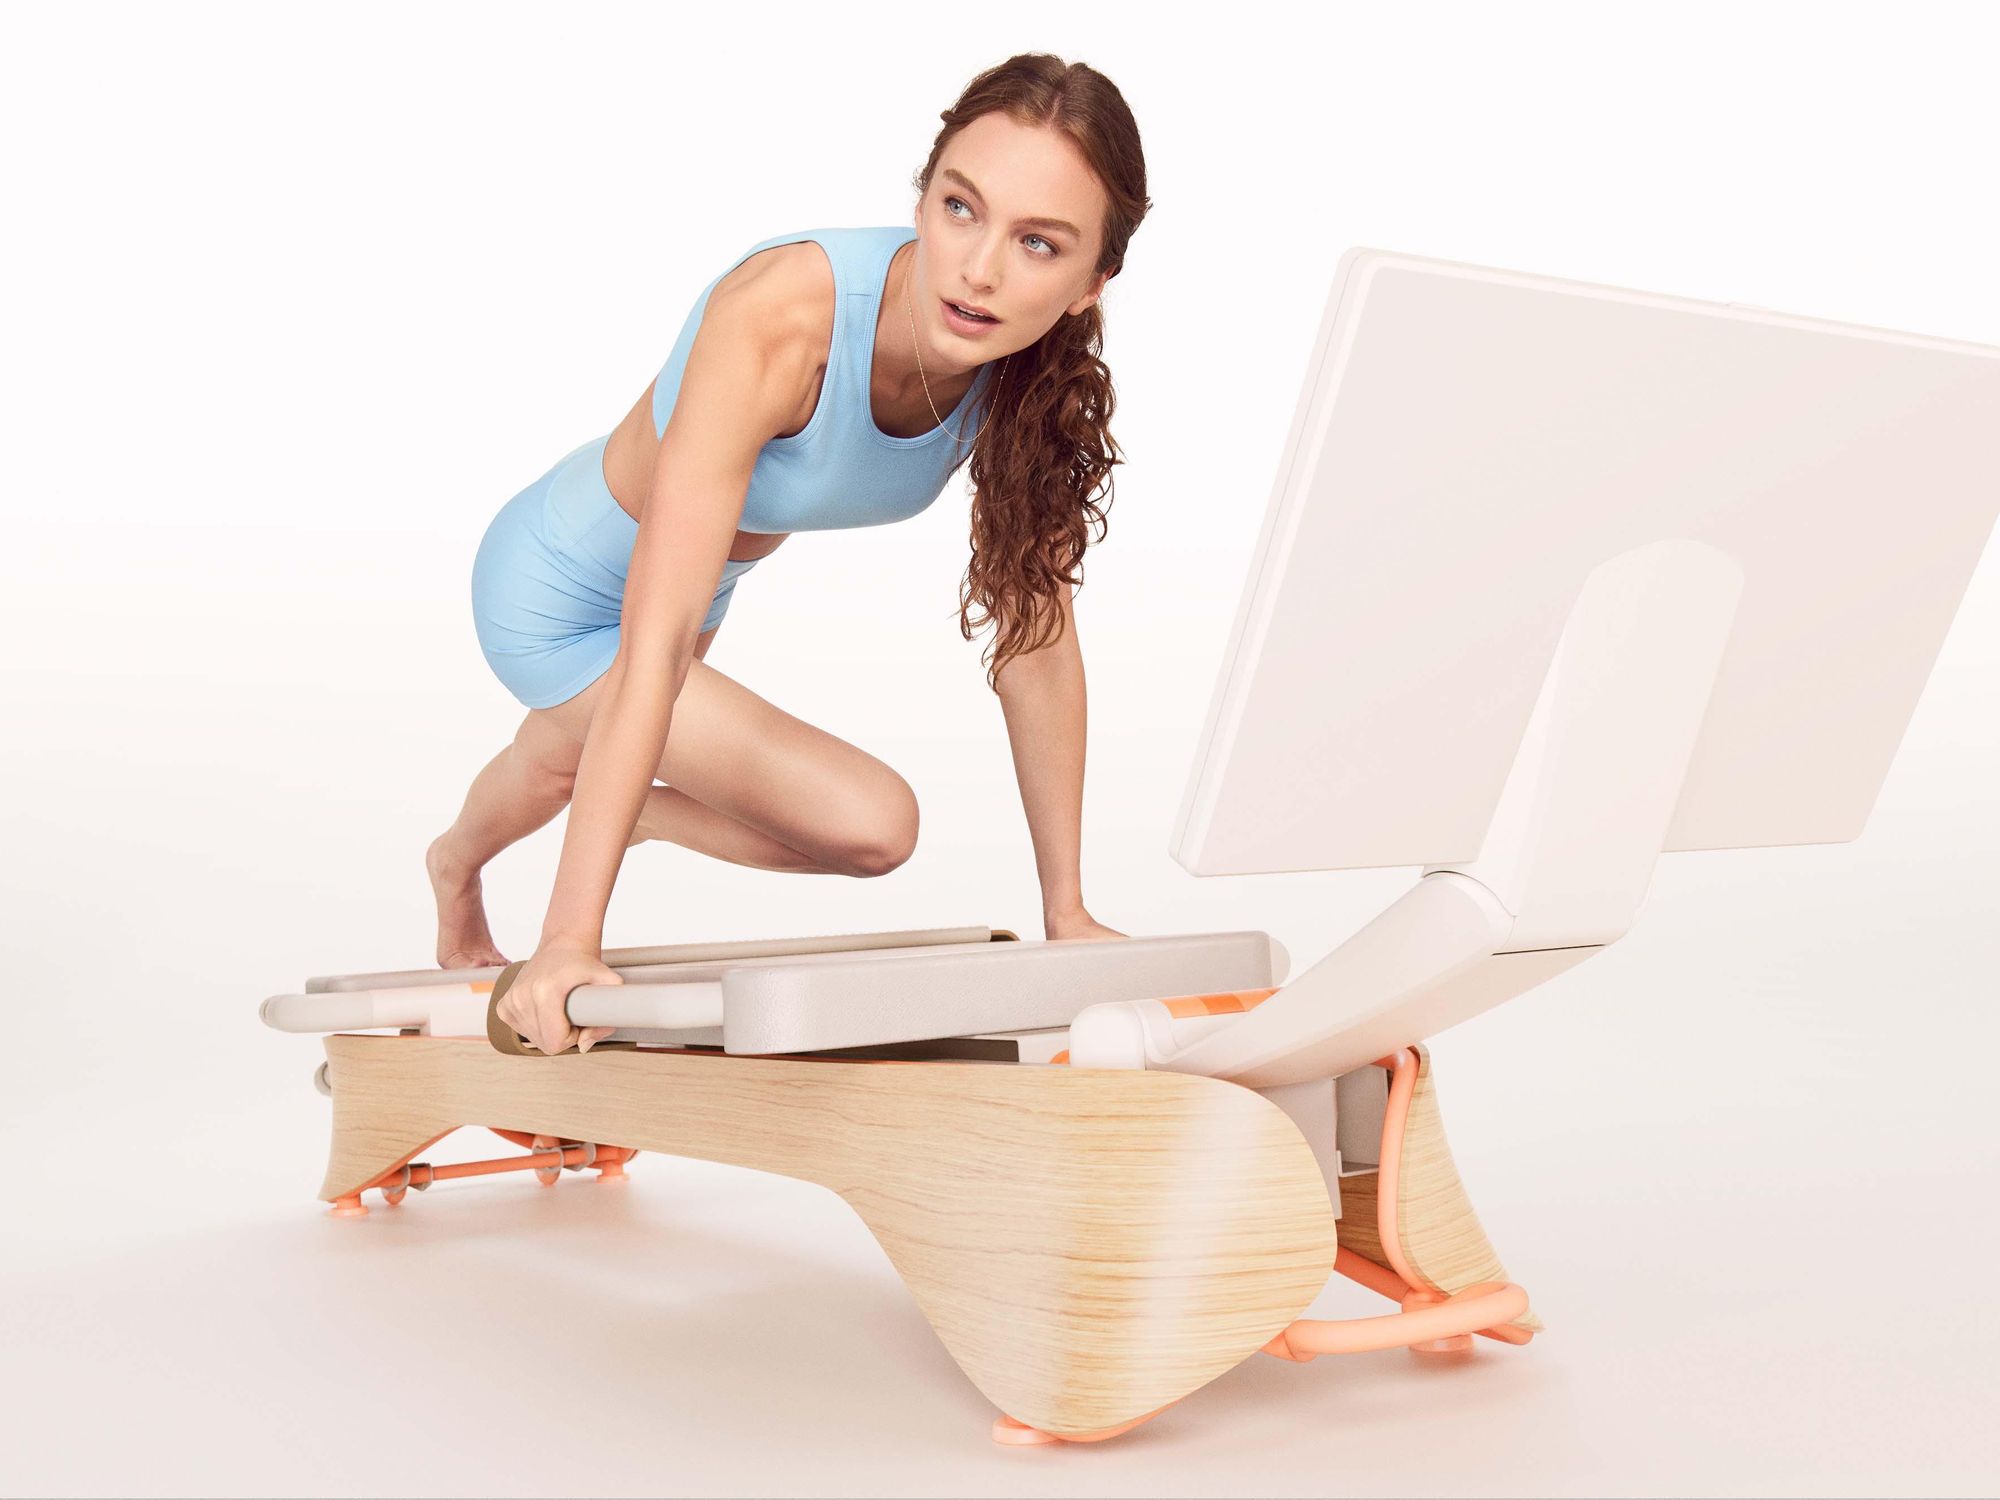 Frame Fitness reinvents the Pilates reformer for at-home fitness.